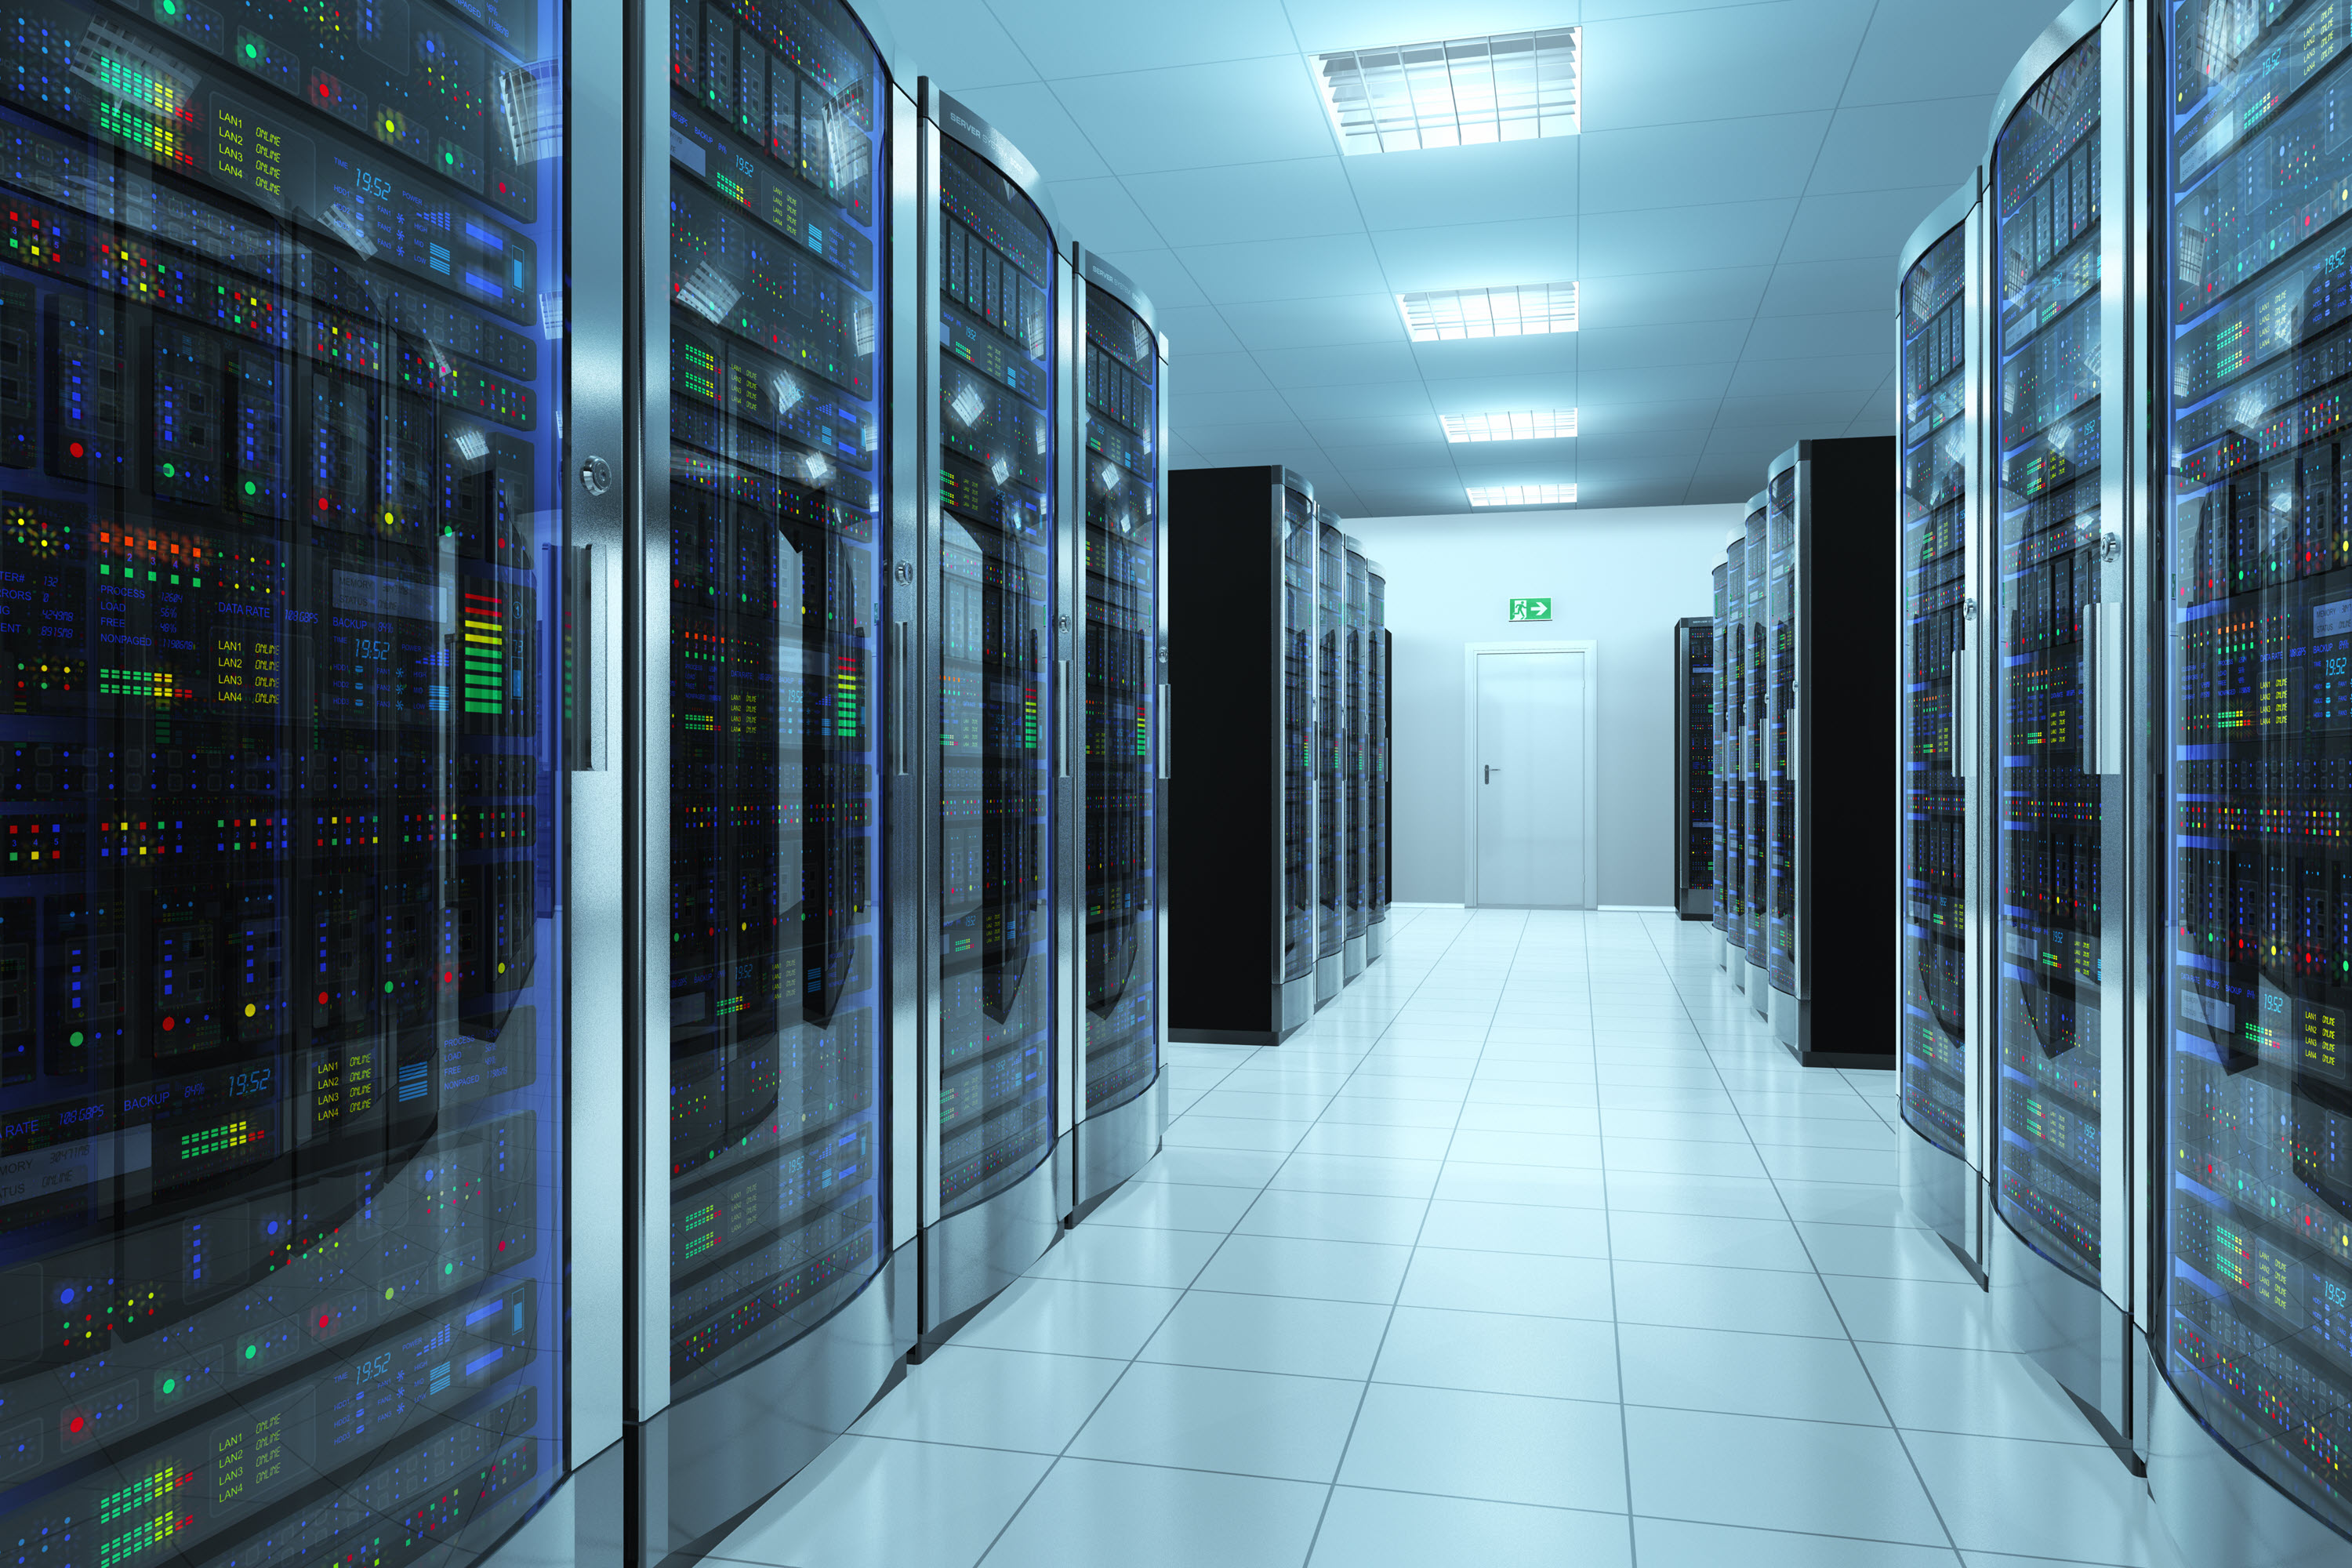 A second image of a server room with servers containing digital information